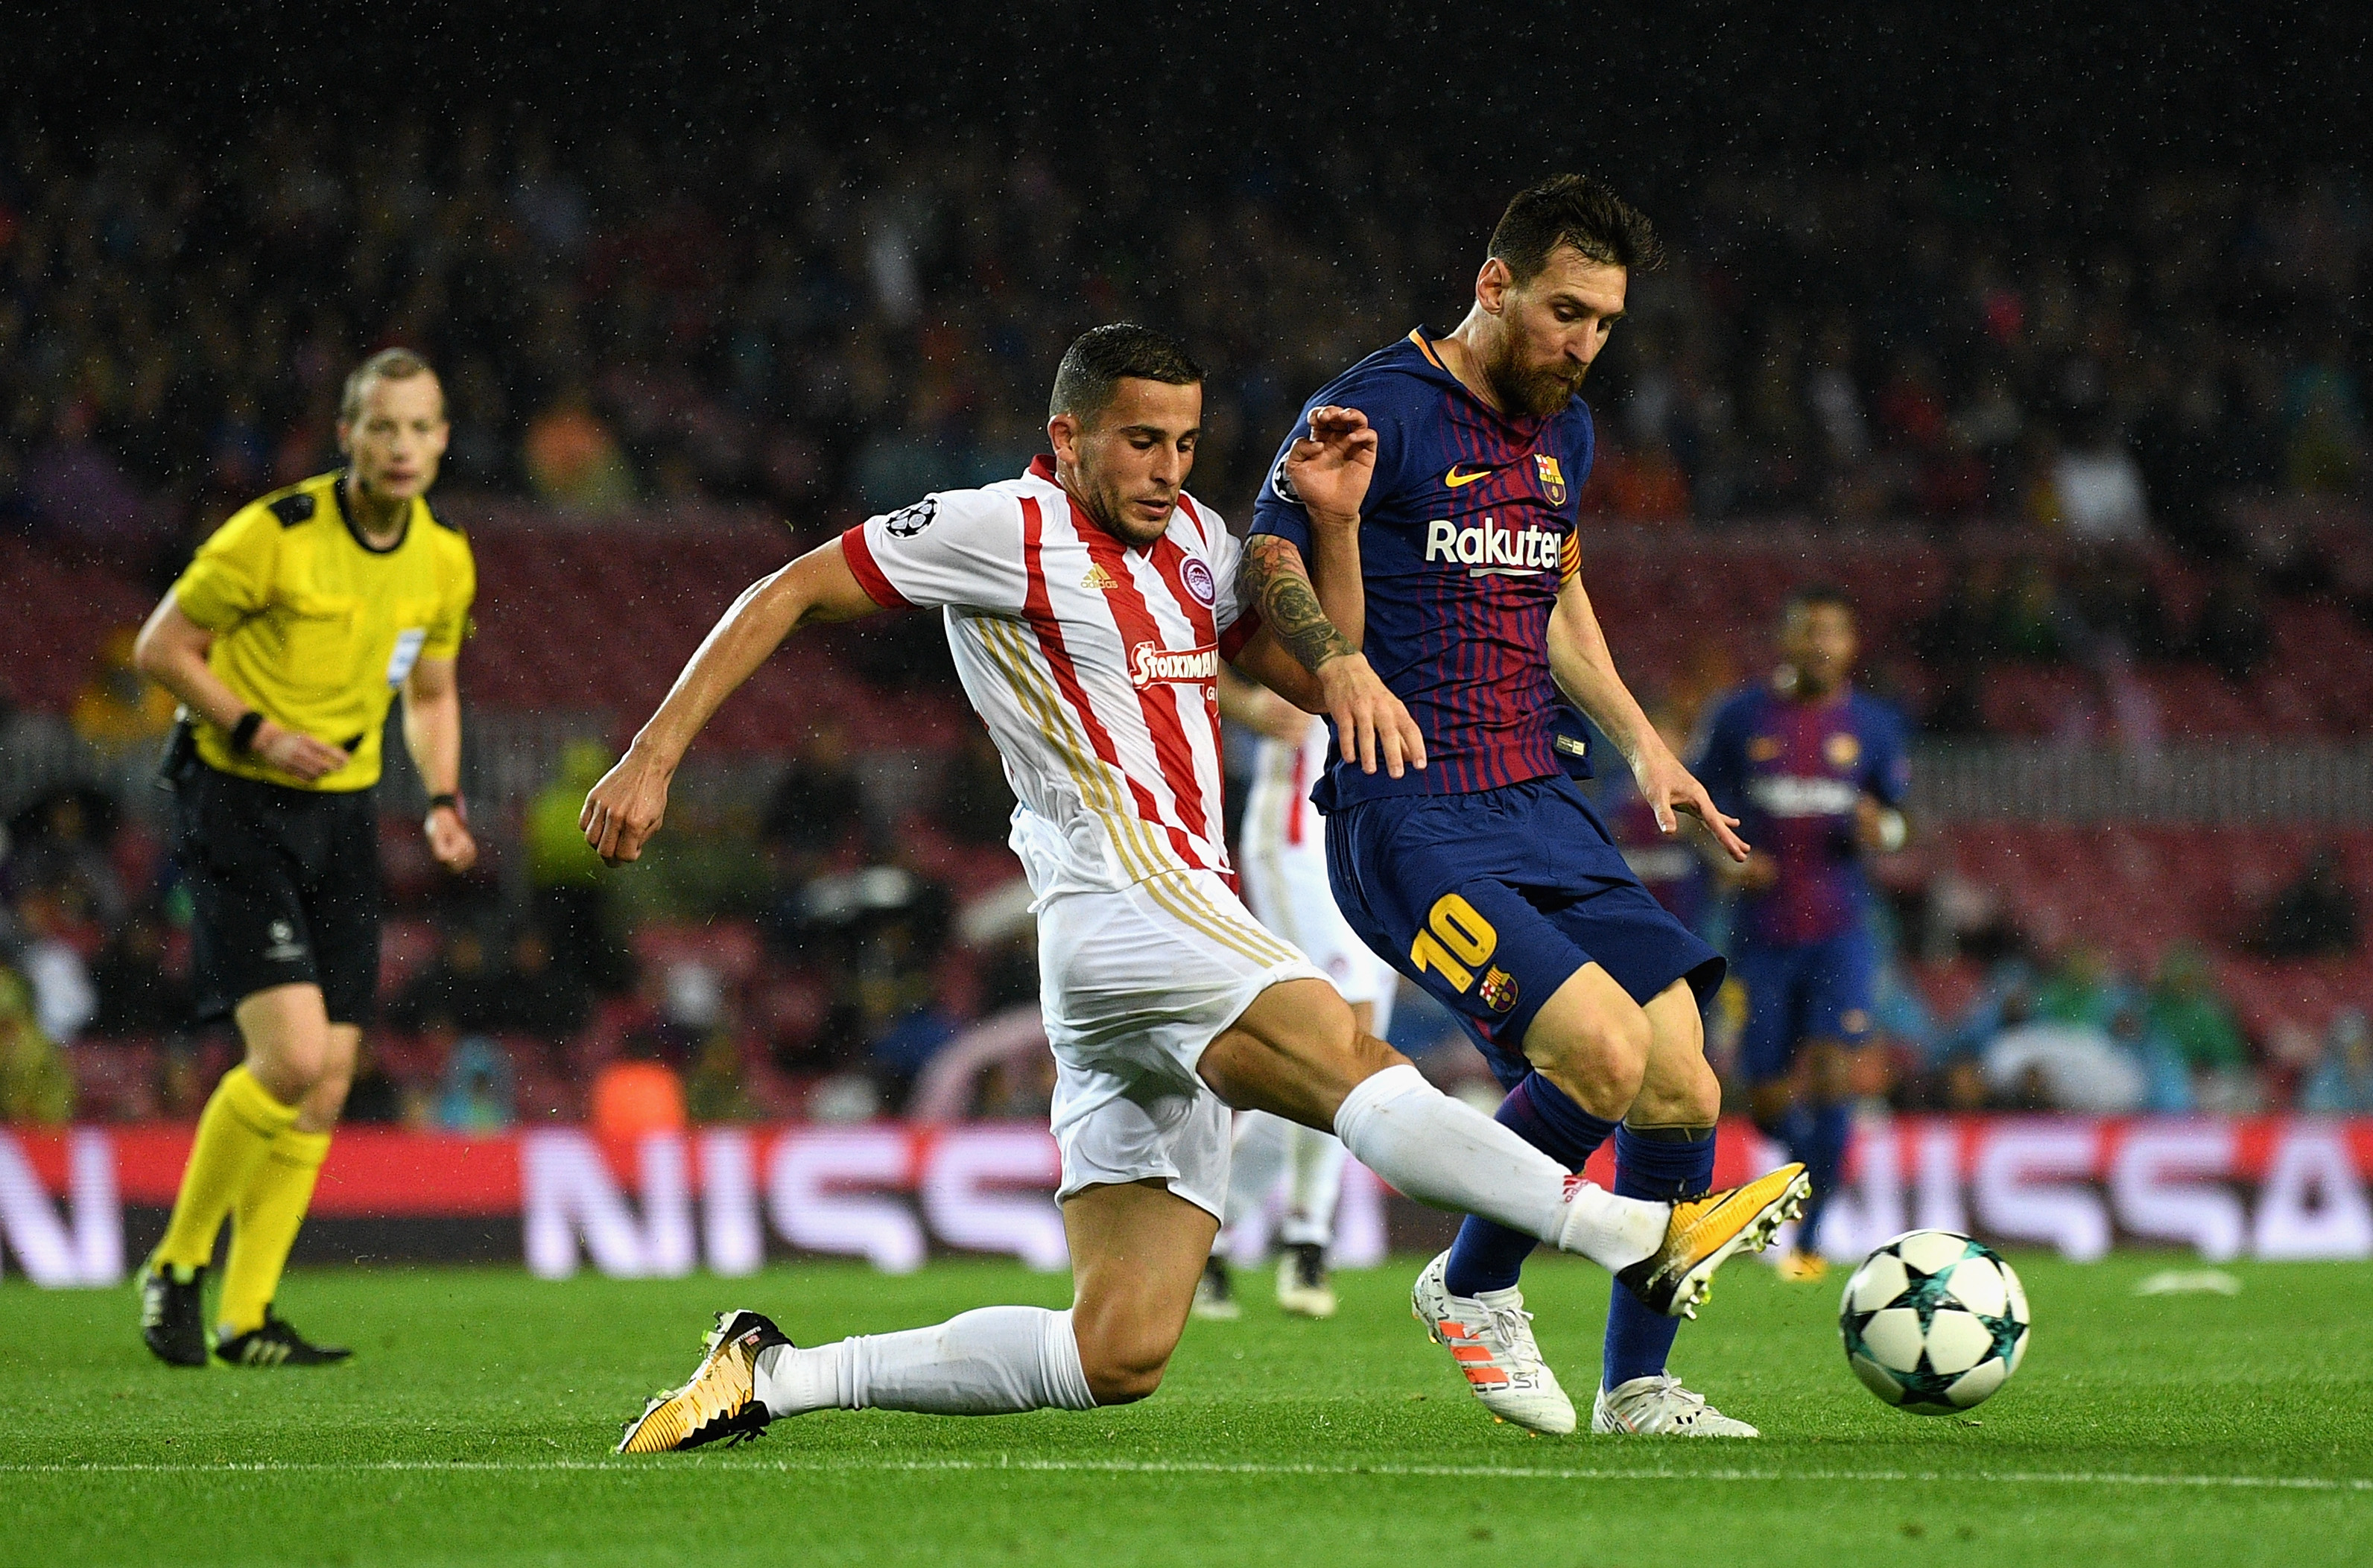 BARCELONA, SPAIN - OCTOBER 18: Lionel Messi of Barcelona and Omar Elabdellaoui of Olympiacos battle for possession during the UEFA Champions League group D match between FC Barcelona and Olympiakos Piraeus at Camp Nou on October 18, 2017 in Barcelona, Spain.  (Photo by David Ramos/Getty Images)